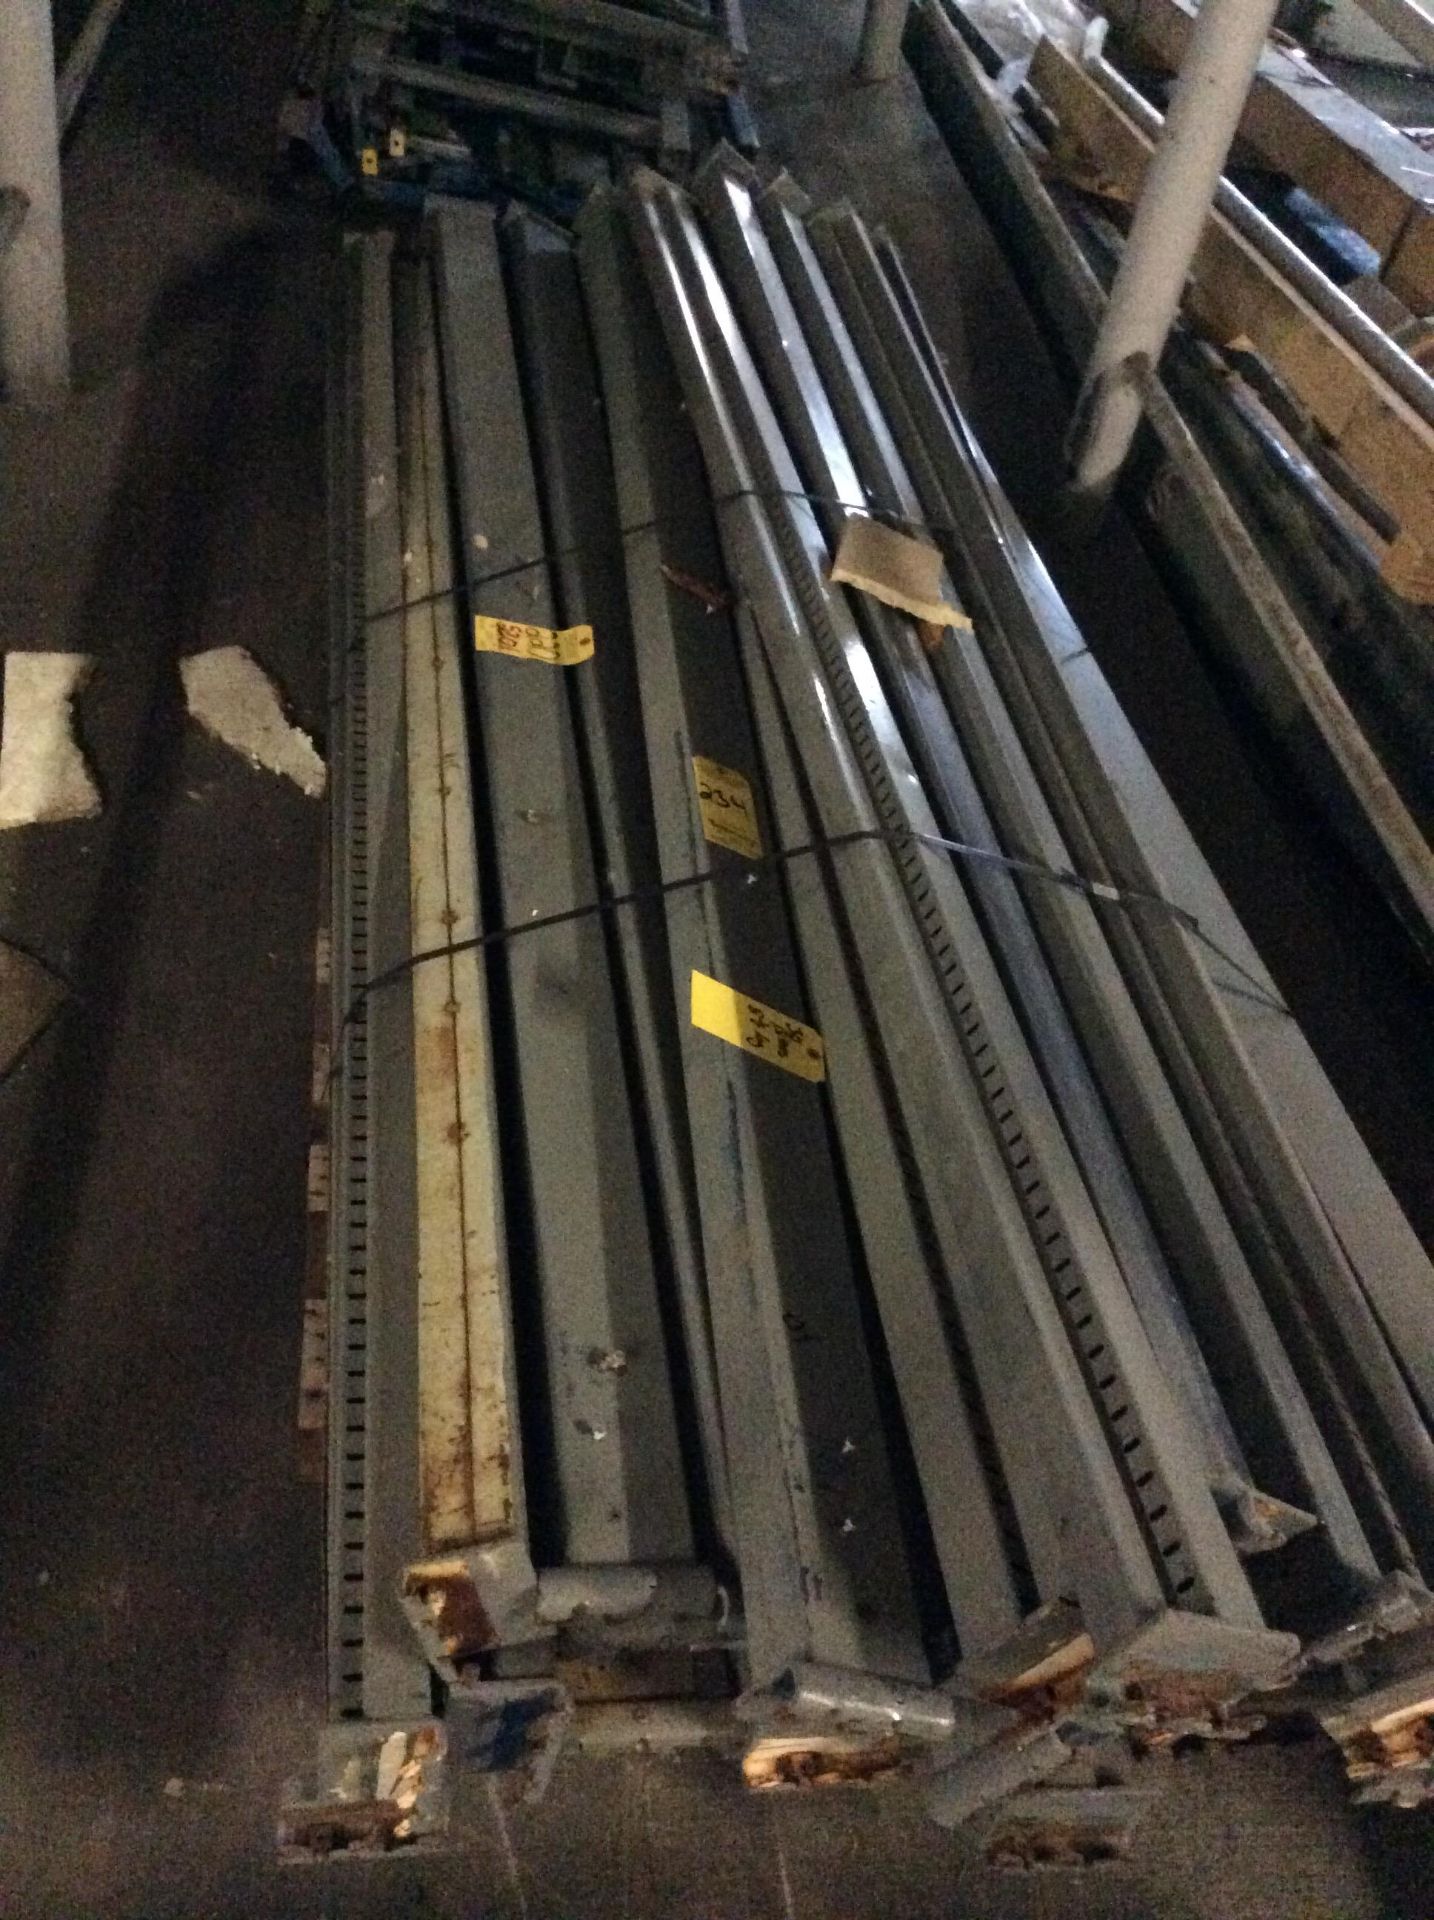 Lot, Pallet Racking, Disassembled, (19) Uprights 10 Ft. X 27 In. Depth, (17) Uprights 8 Ft. X 27 In. - Image 5 of 6